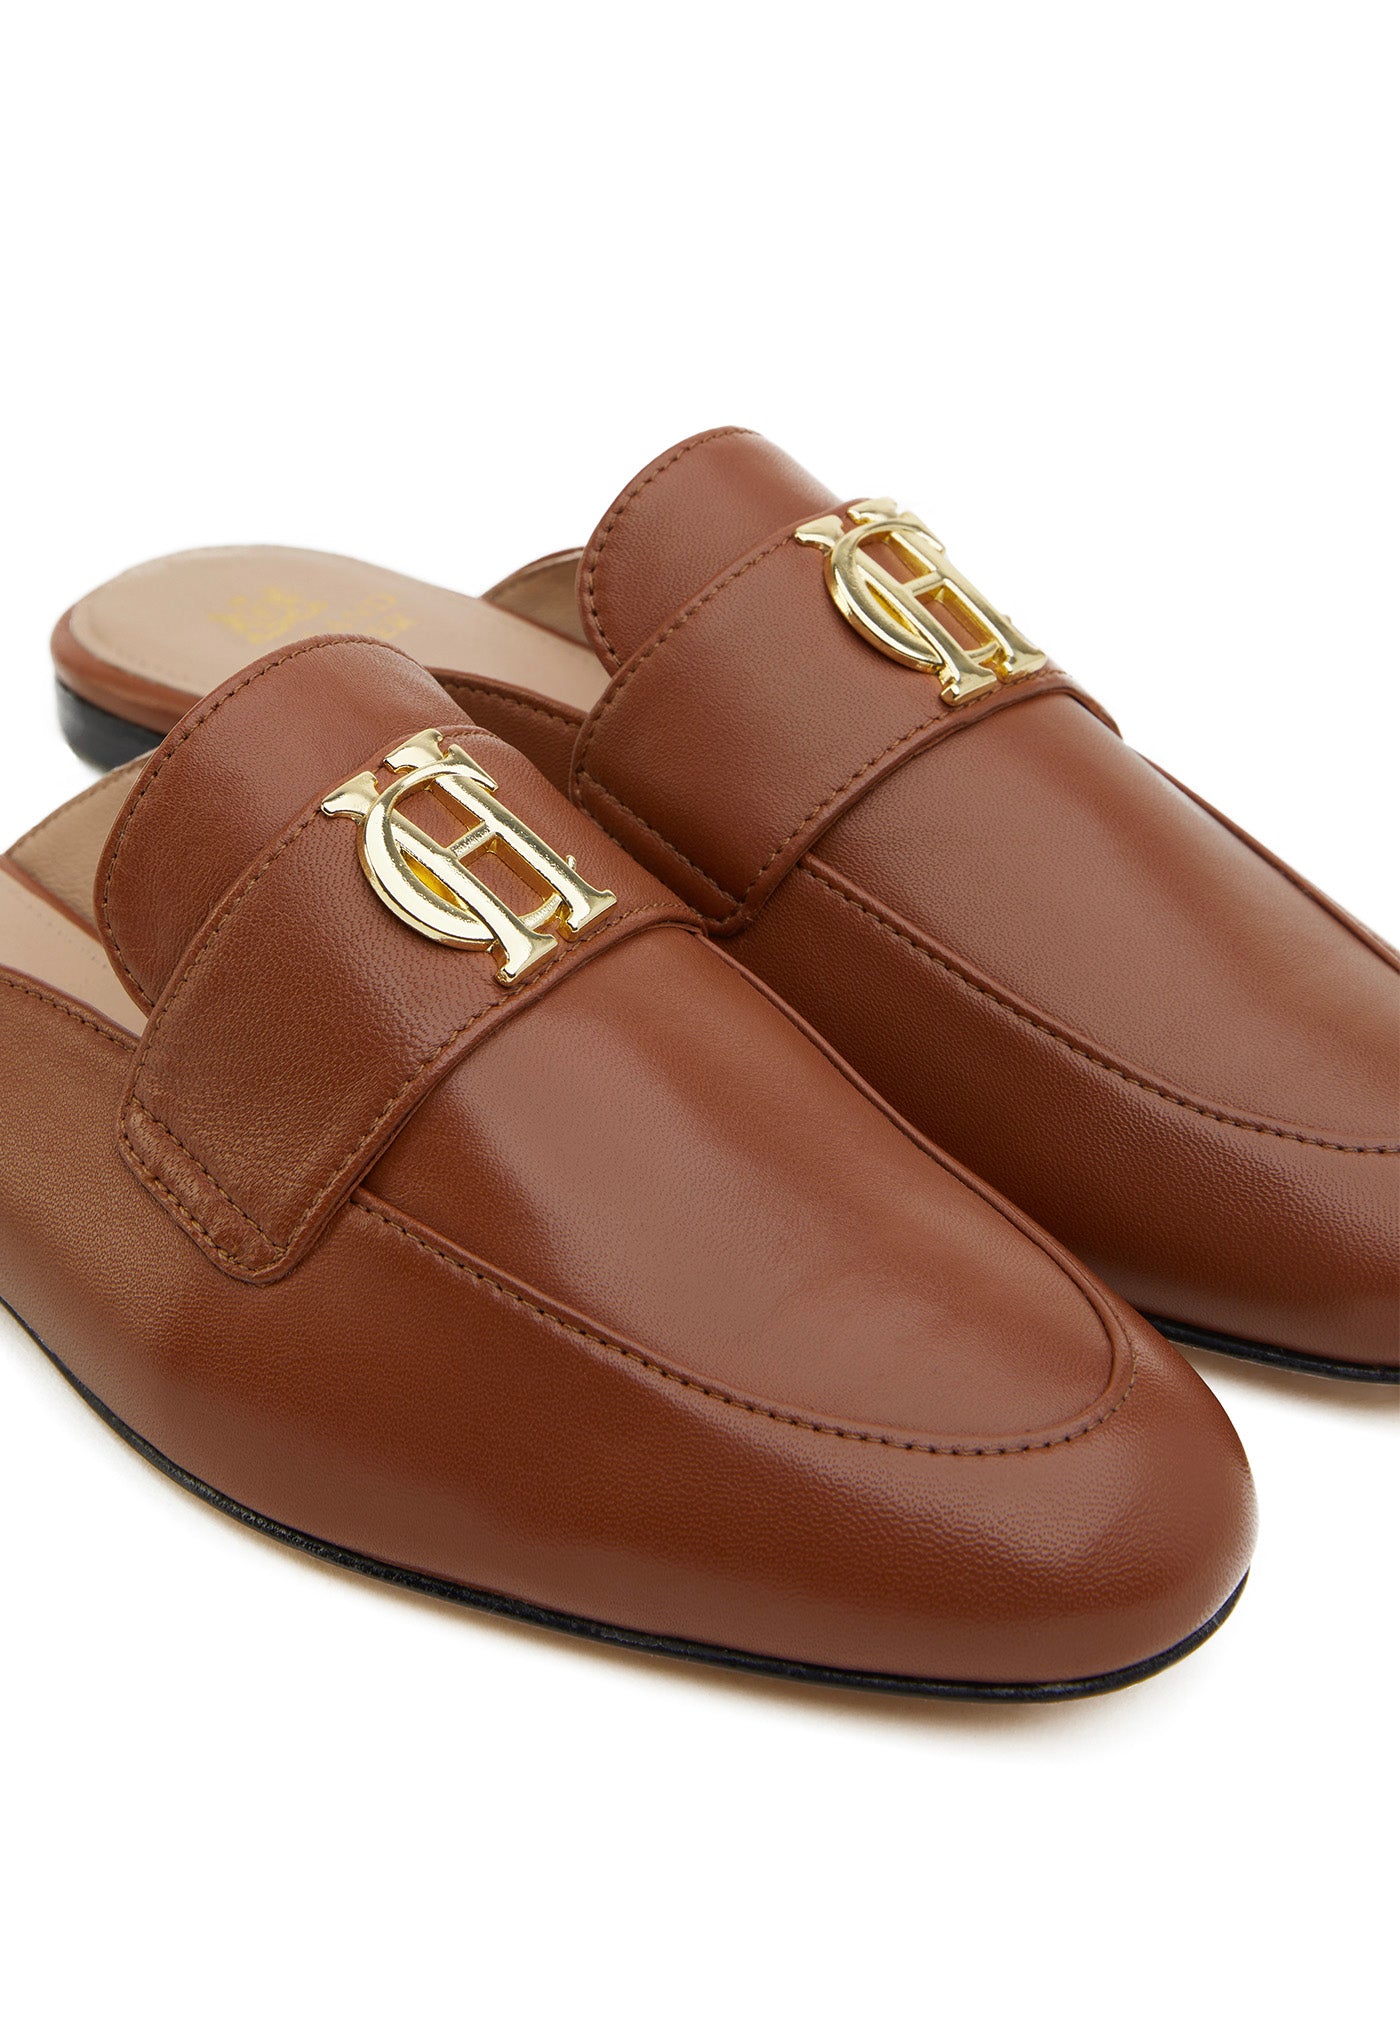 Kingston Loafer - Tan Leather sold by Angel Divine